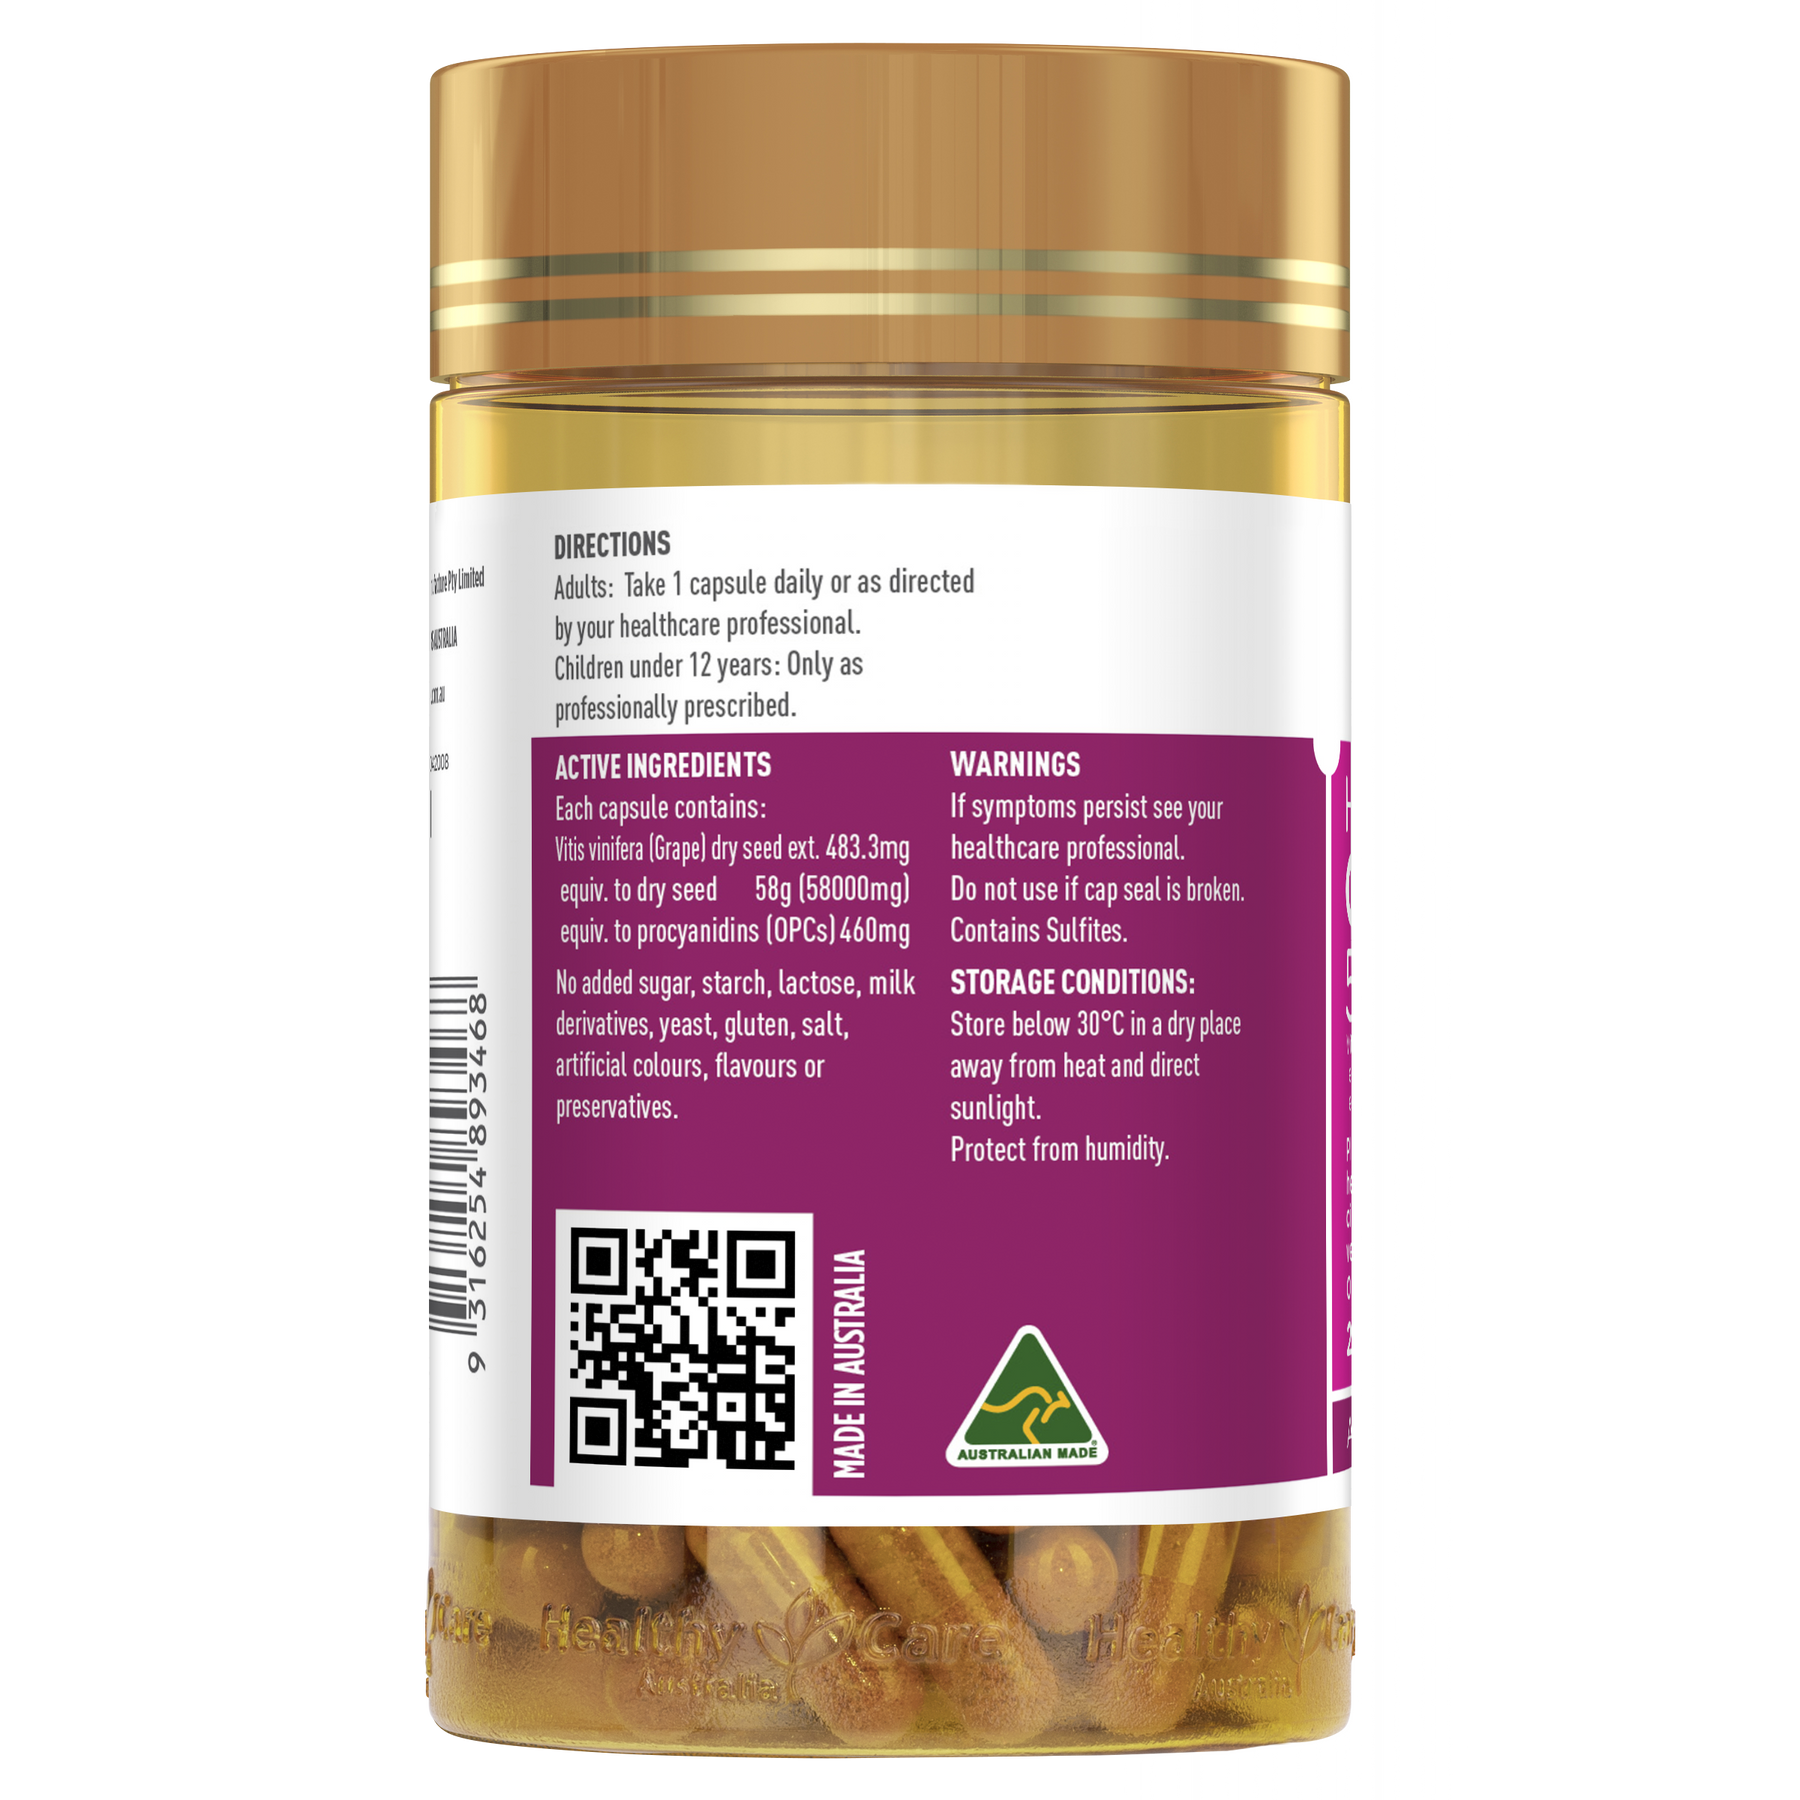 Healthy Care High Strength Grape Seed 58000 - 200 capsules